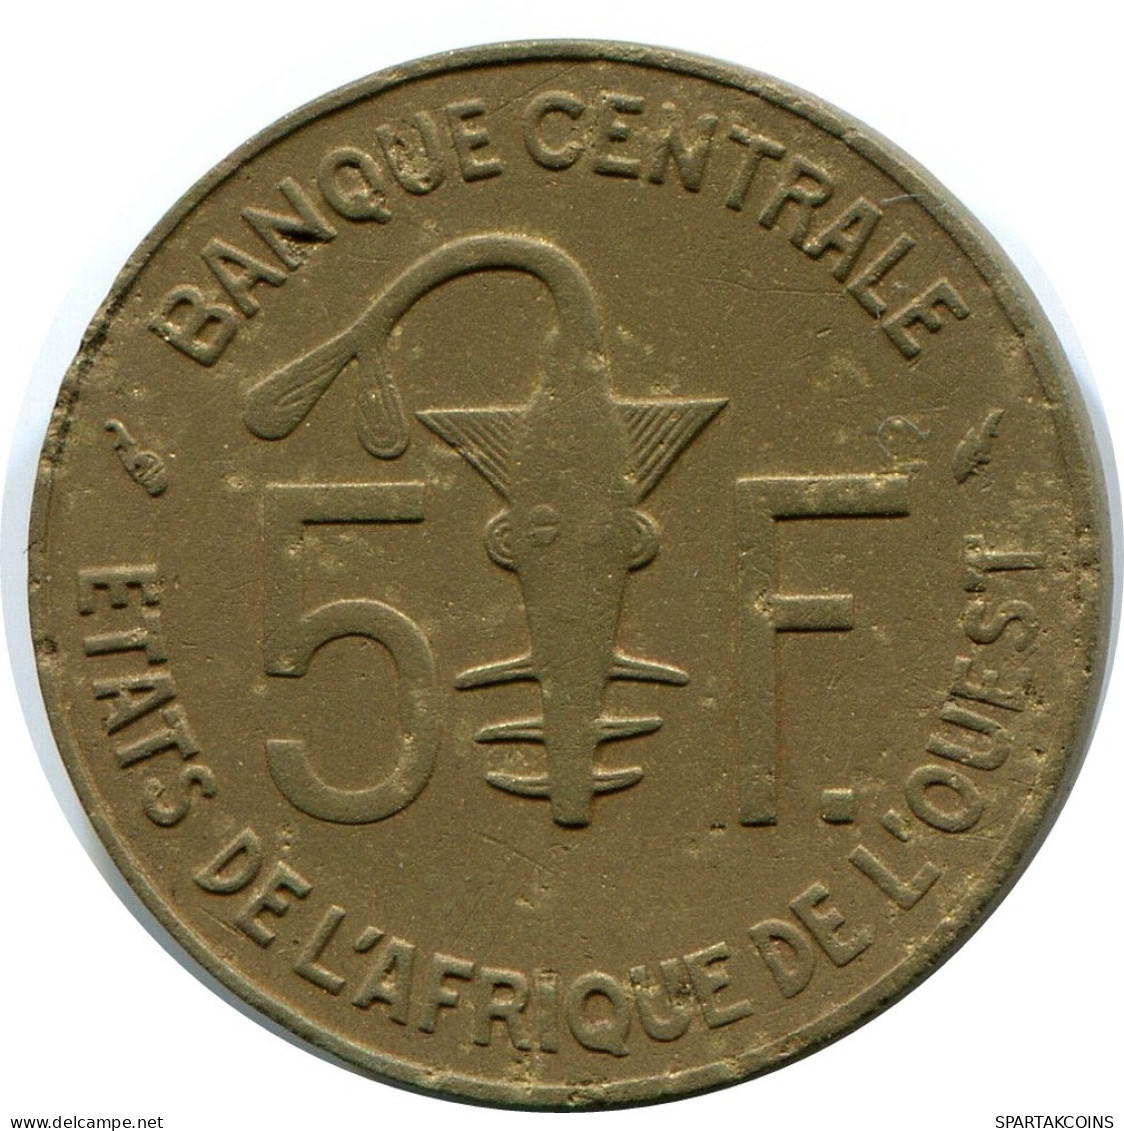 5 FRANCS 1987 WESTERN AFRICAN STATES Moneda #AP955.E.A - Other - Africa